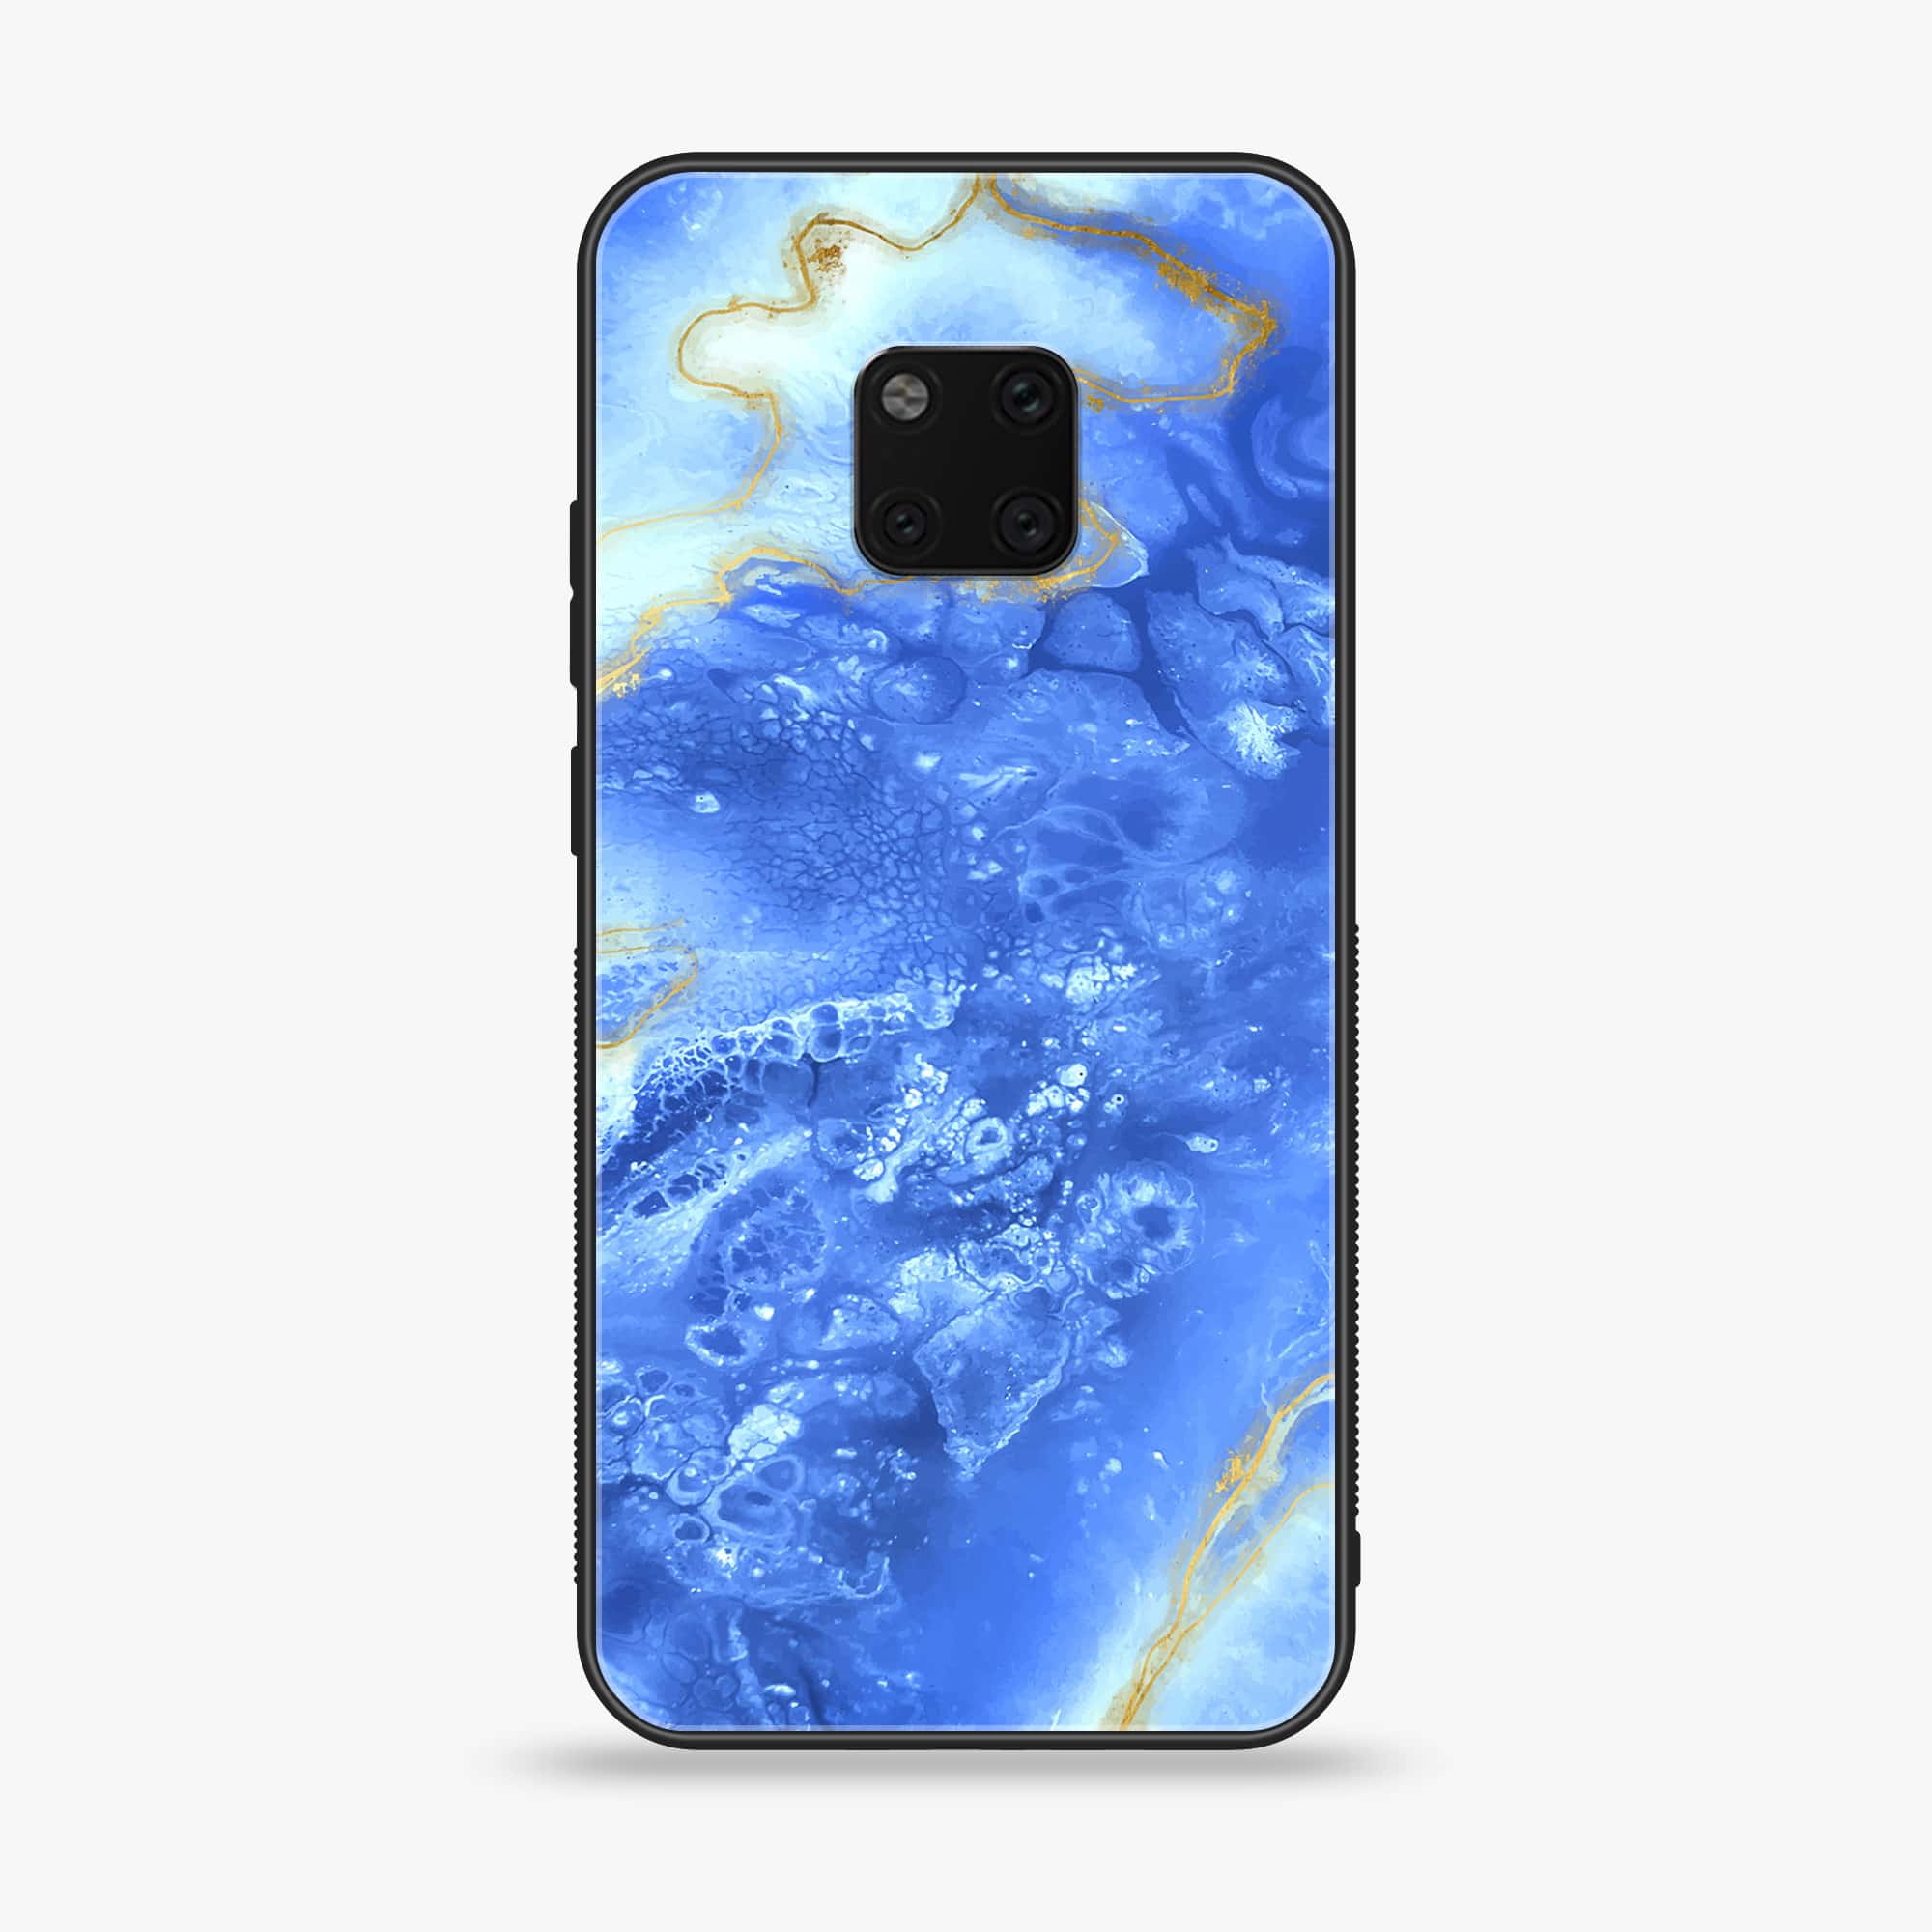 Huawei Mate 20 Pro - Blue Marble Series V 2.0 - Premium Printed Glass soft Bumper shock Proof Case